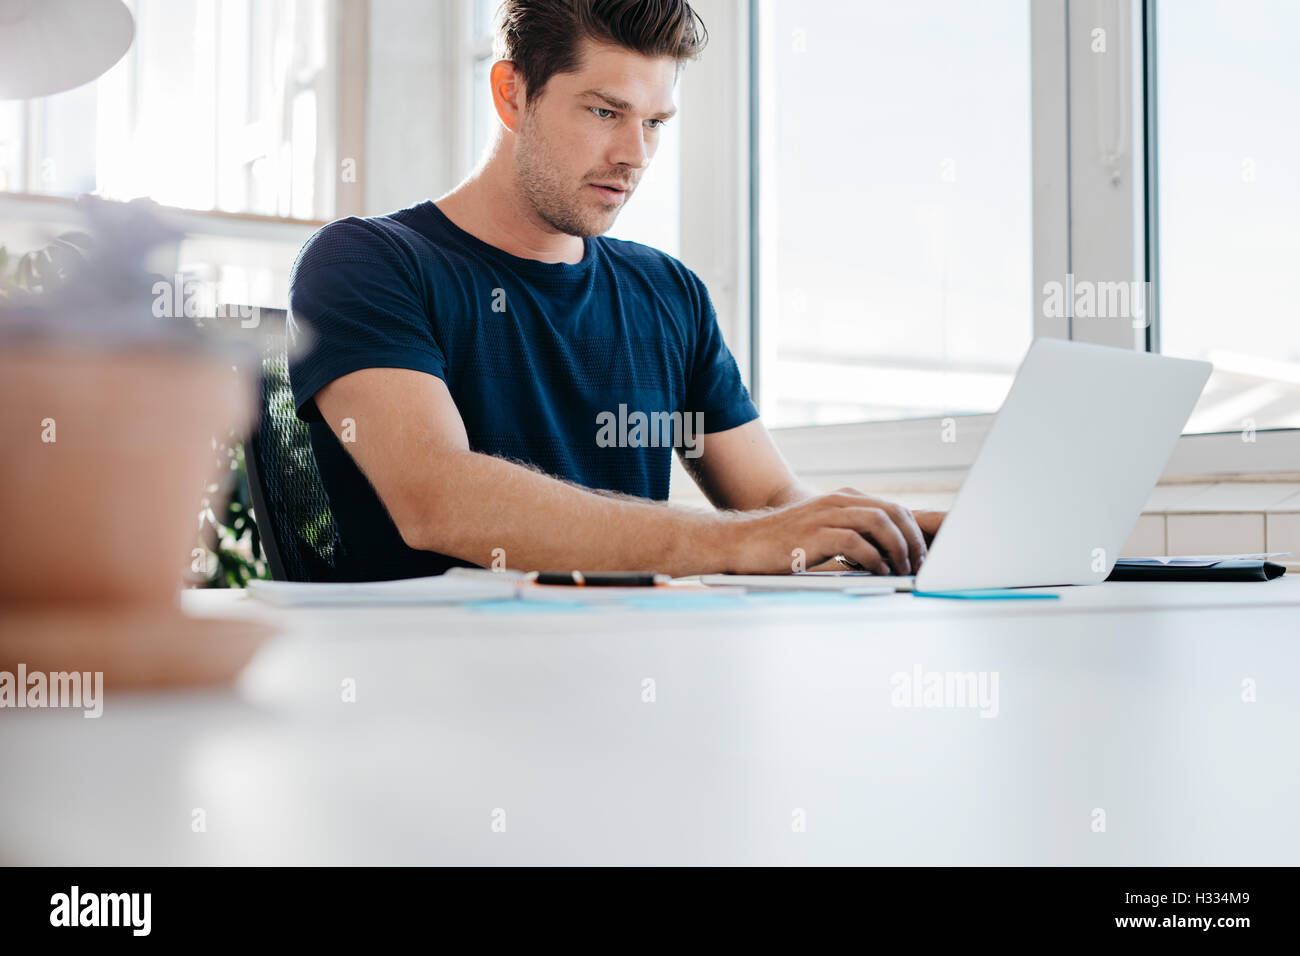 Busy young man working on laptop computer in office. Young male executive using laptop at his desk. Stock Photo